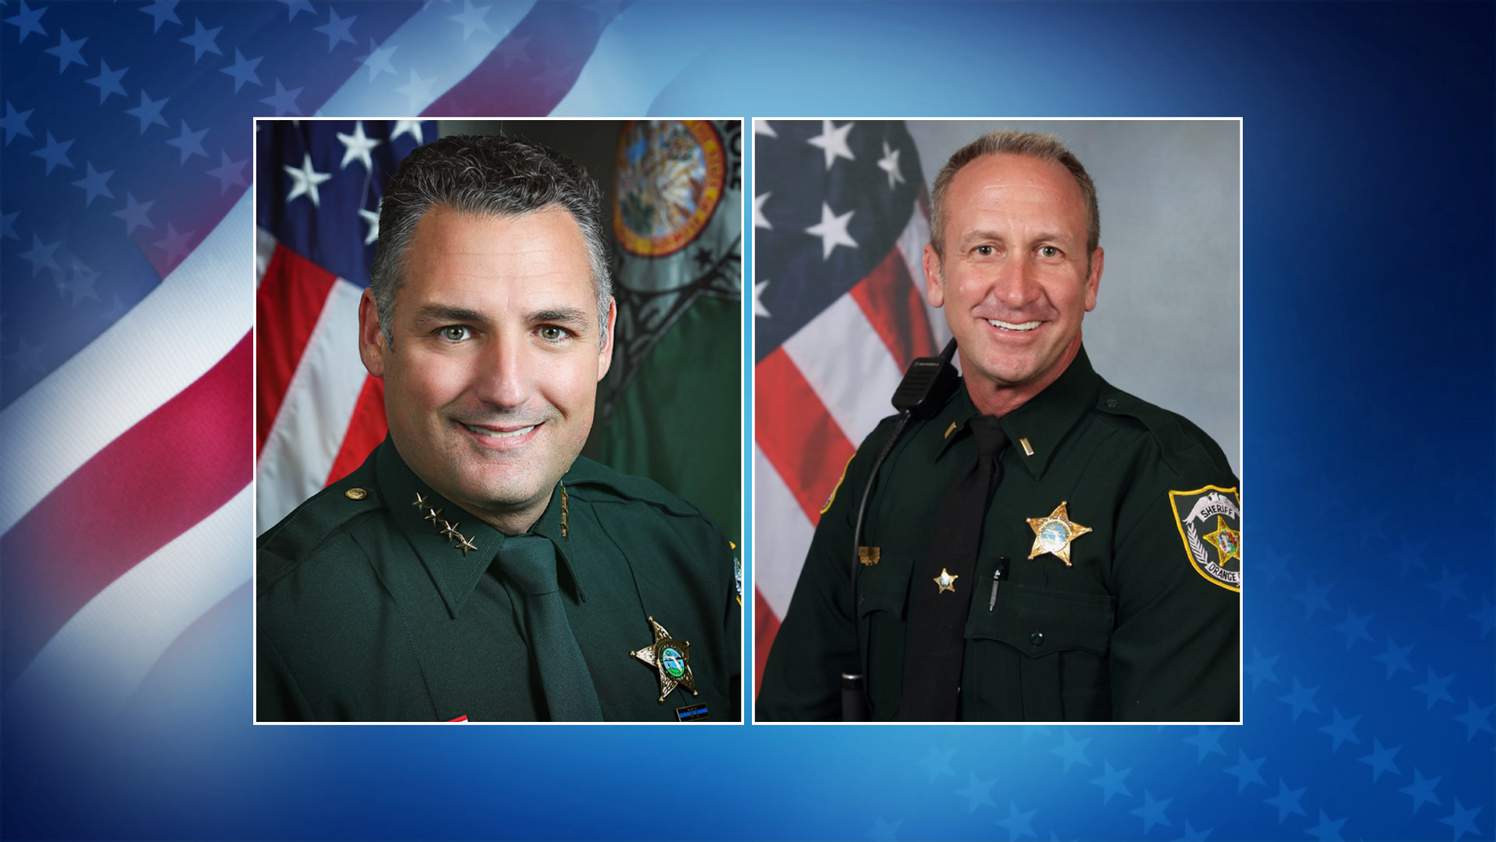 Meet the candidates: Here’s who’s running for Seminole County sheriff